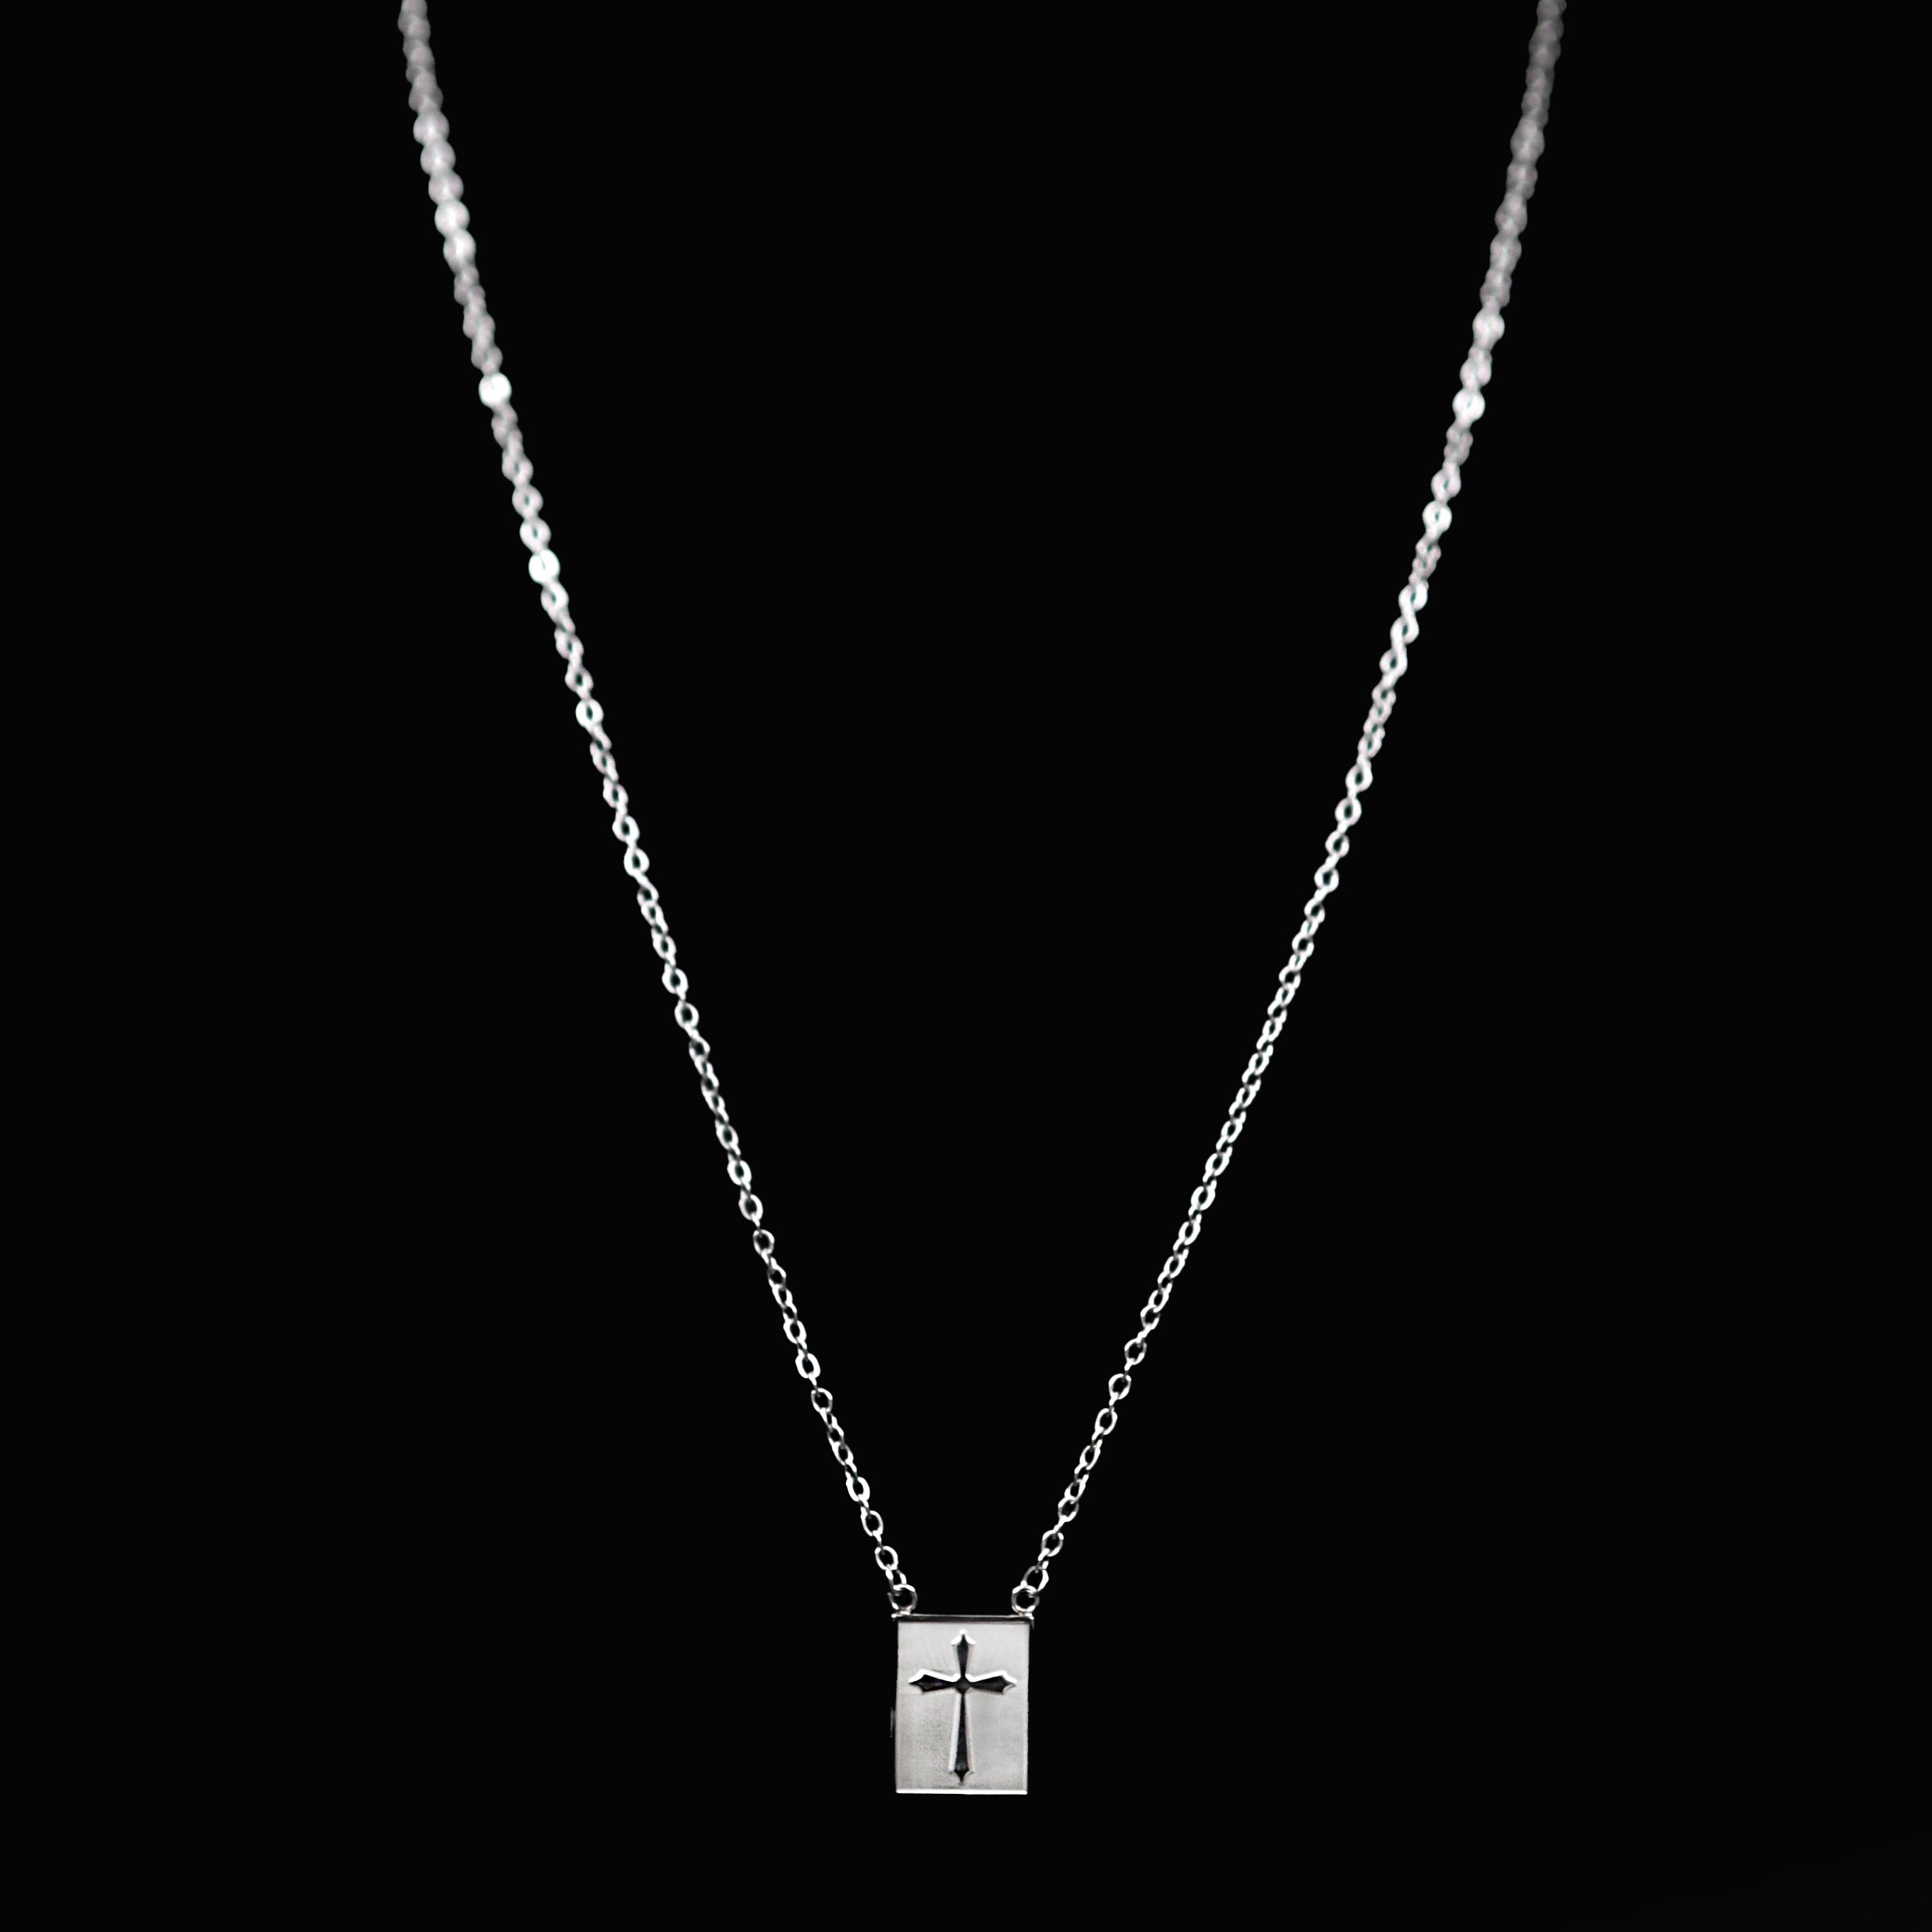 Hector Stainless Steel Chain Necklace with Symbolic Pendant